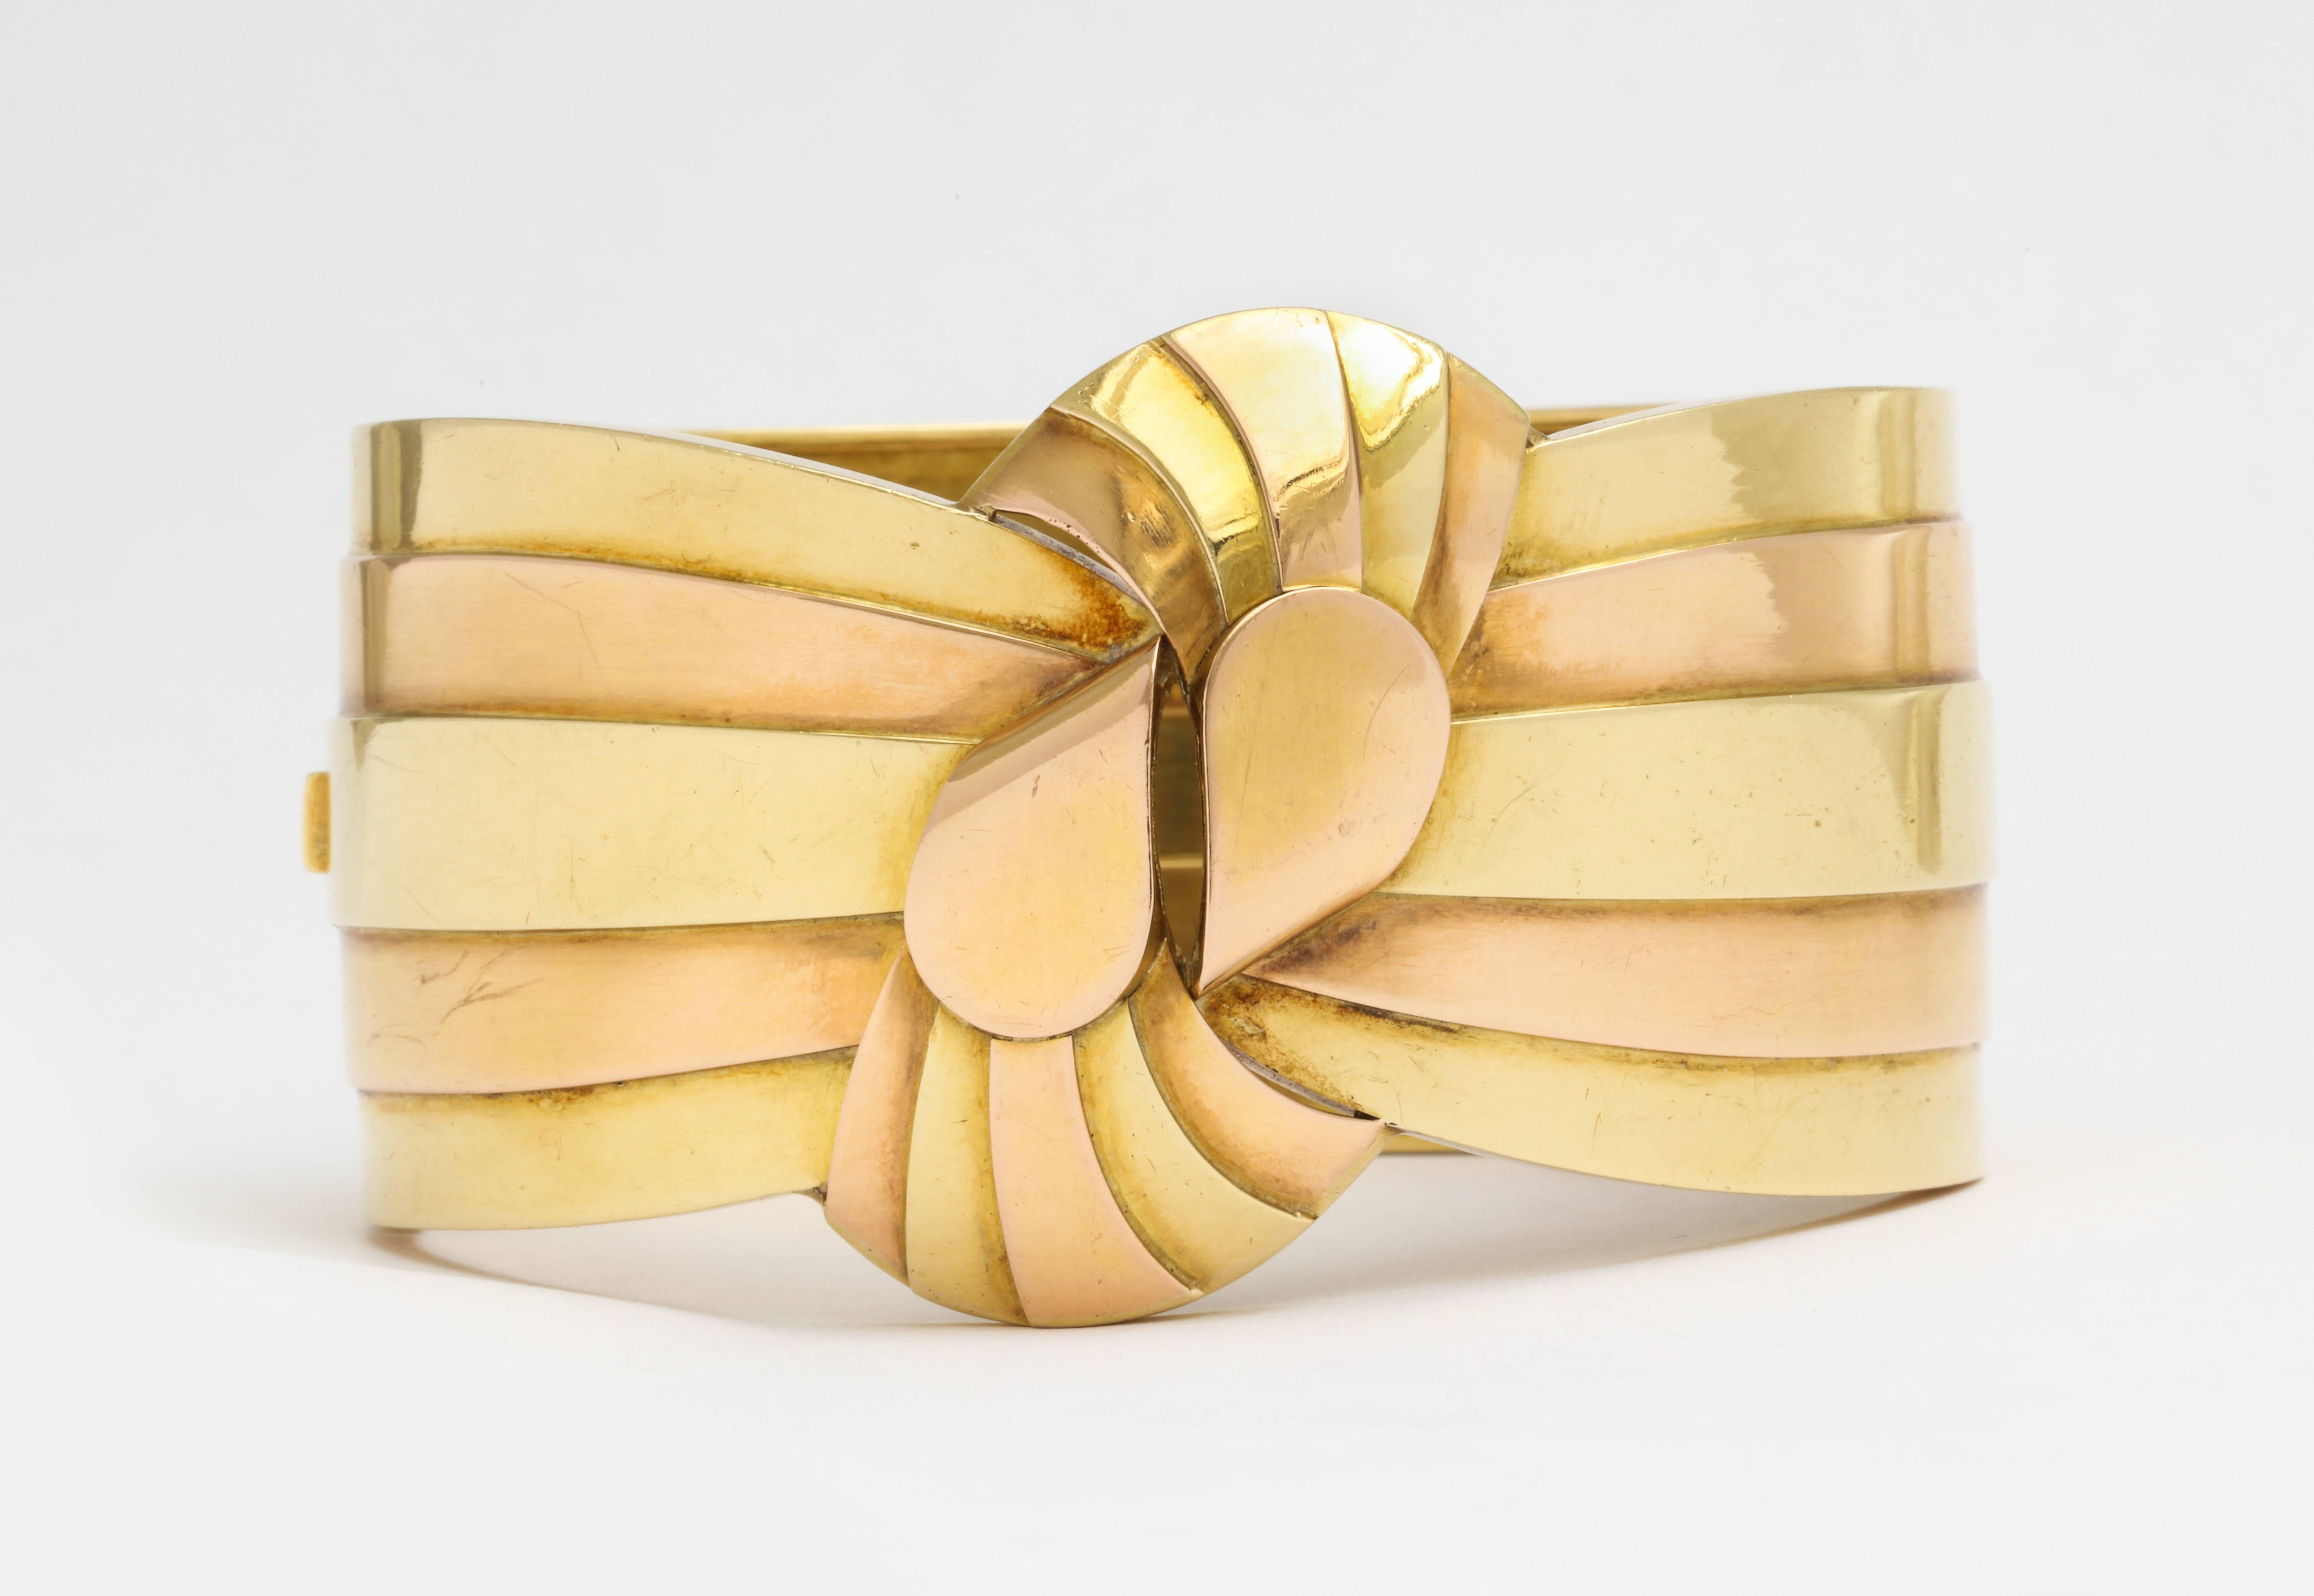 A stunning French Retro two tone 18K gold cuff bracelet as wide ribbons tied in a flat modern knot.  1 1/2 inches x 8 inches. French gold marks.